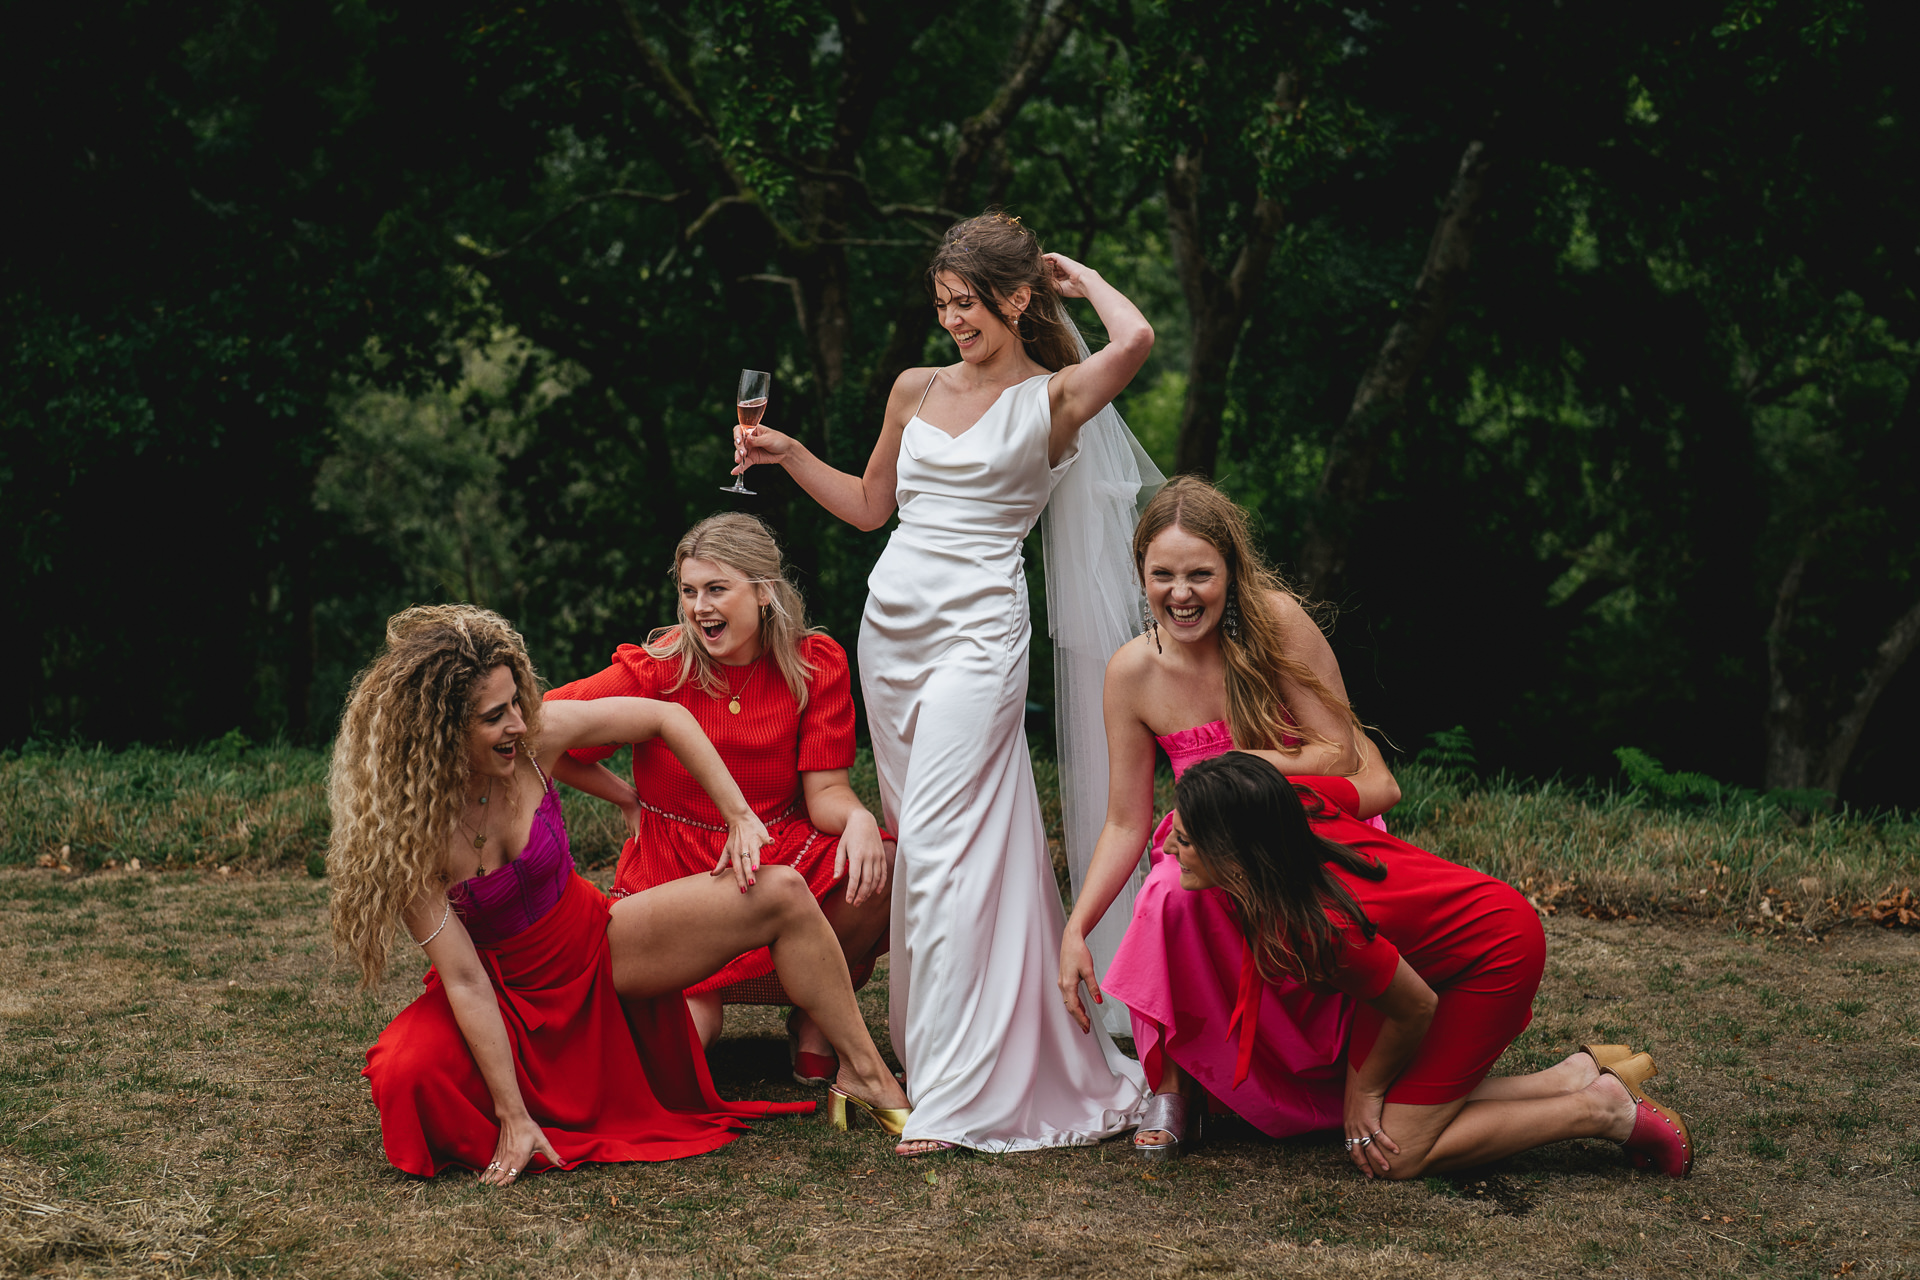 A bride in a Vivienne Westwood wedding dress surrounded by bridesmaids in stylish red and pink outfits